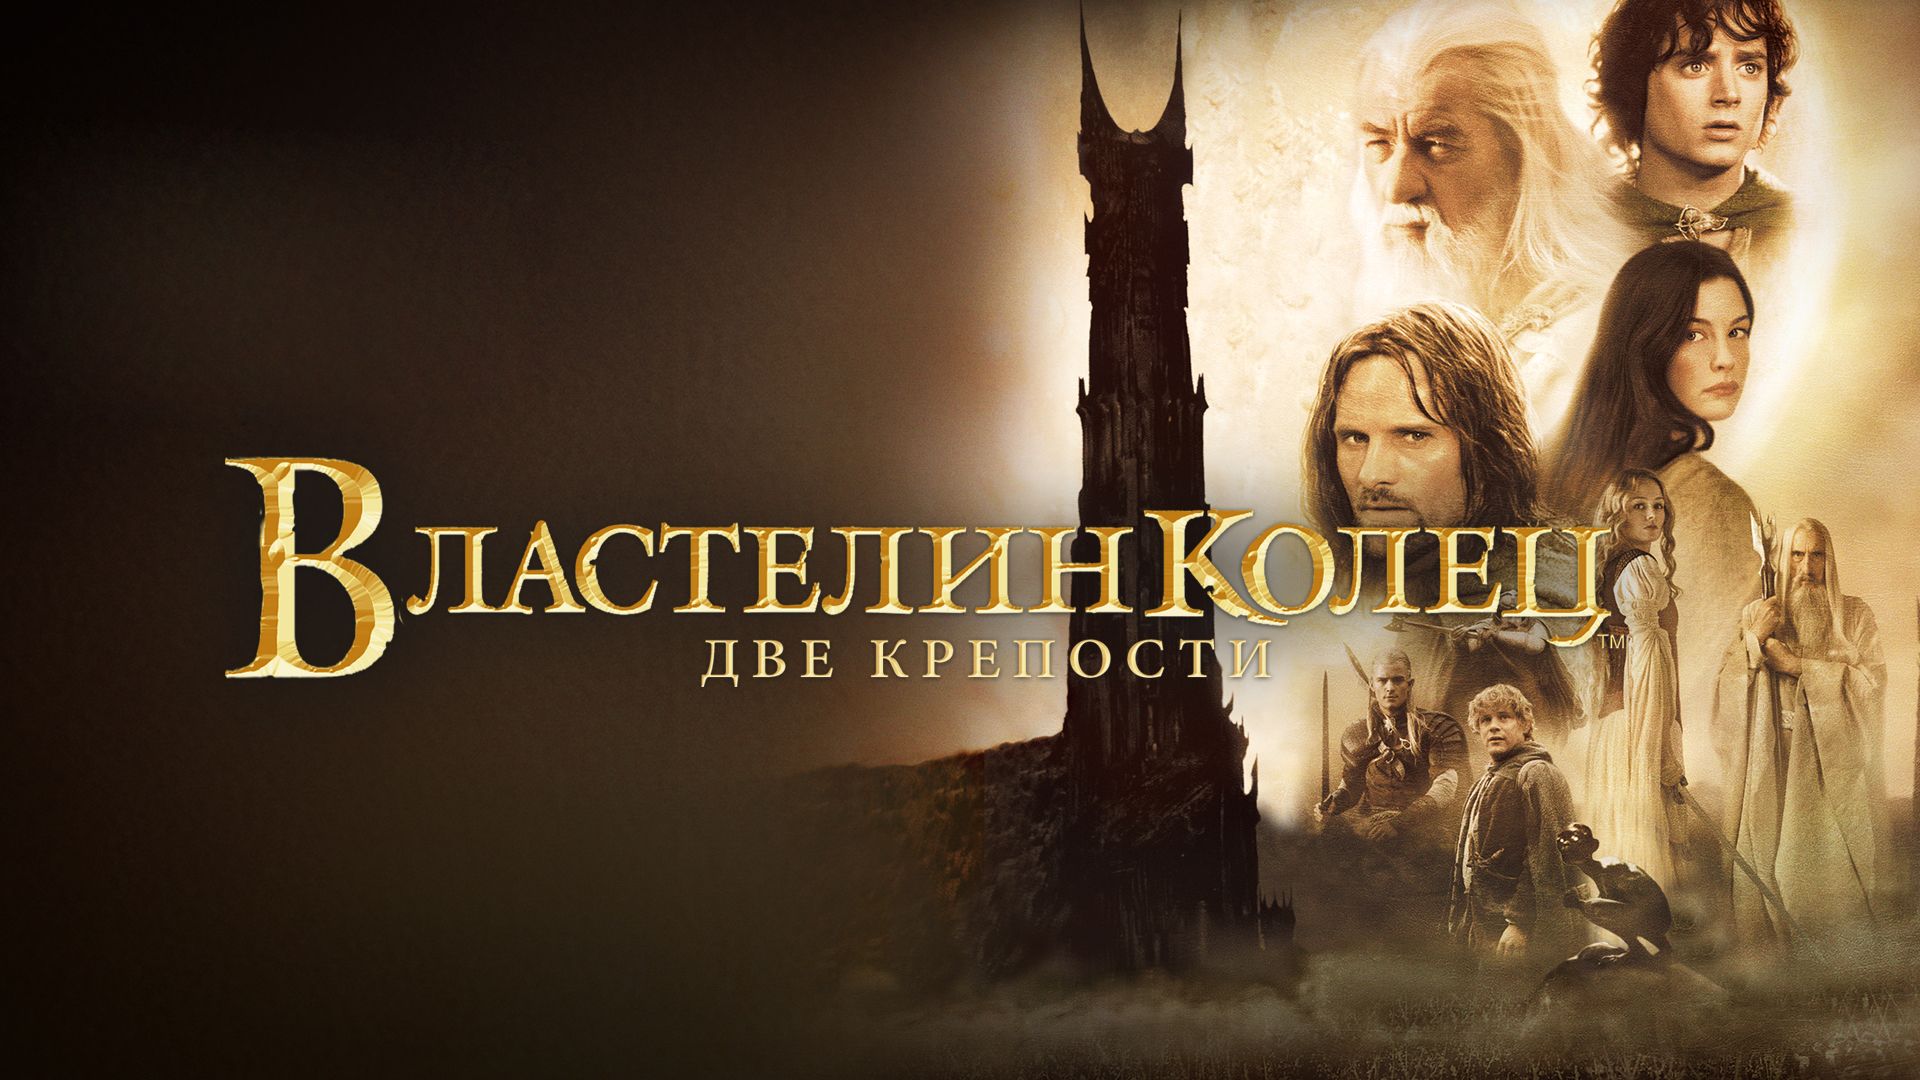 Властелин колец: Две крепости | The Lord of the Rings: The Two Towers (2002)